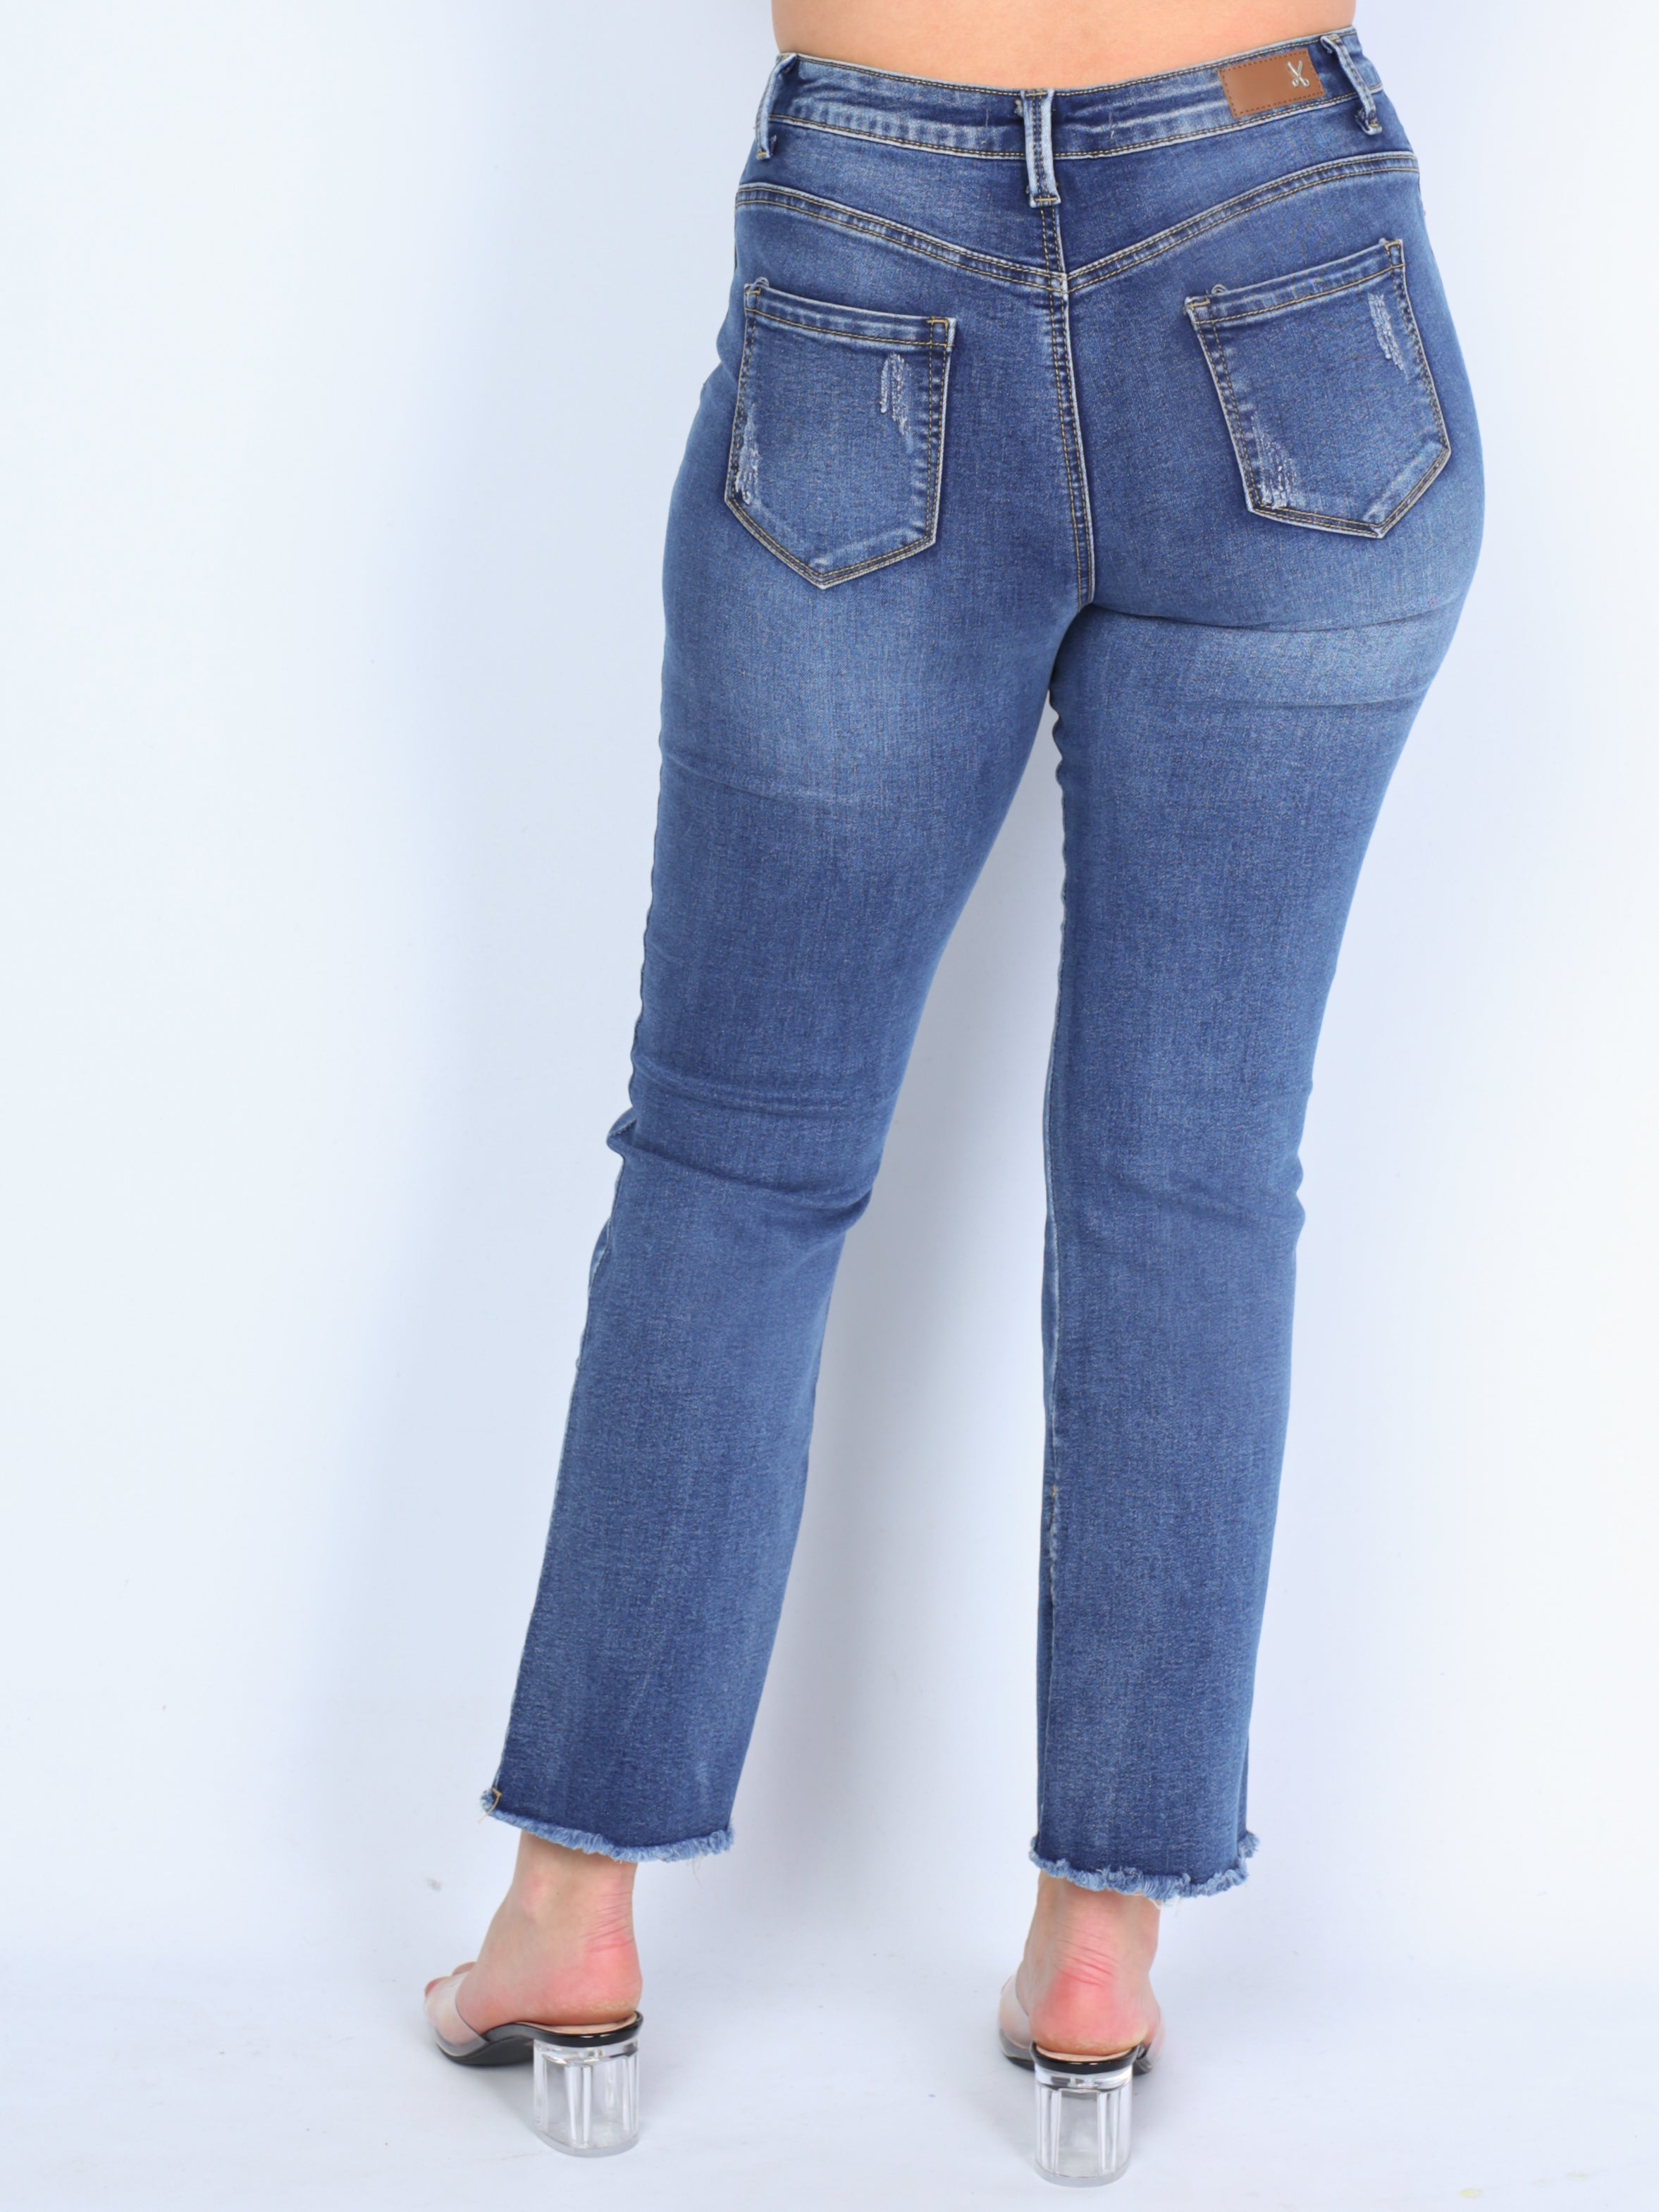 Jeans with ripstops